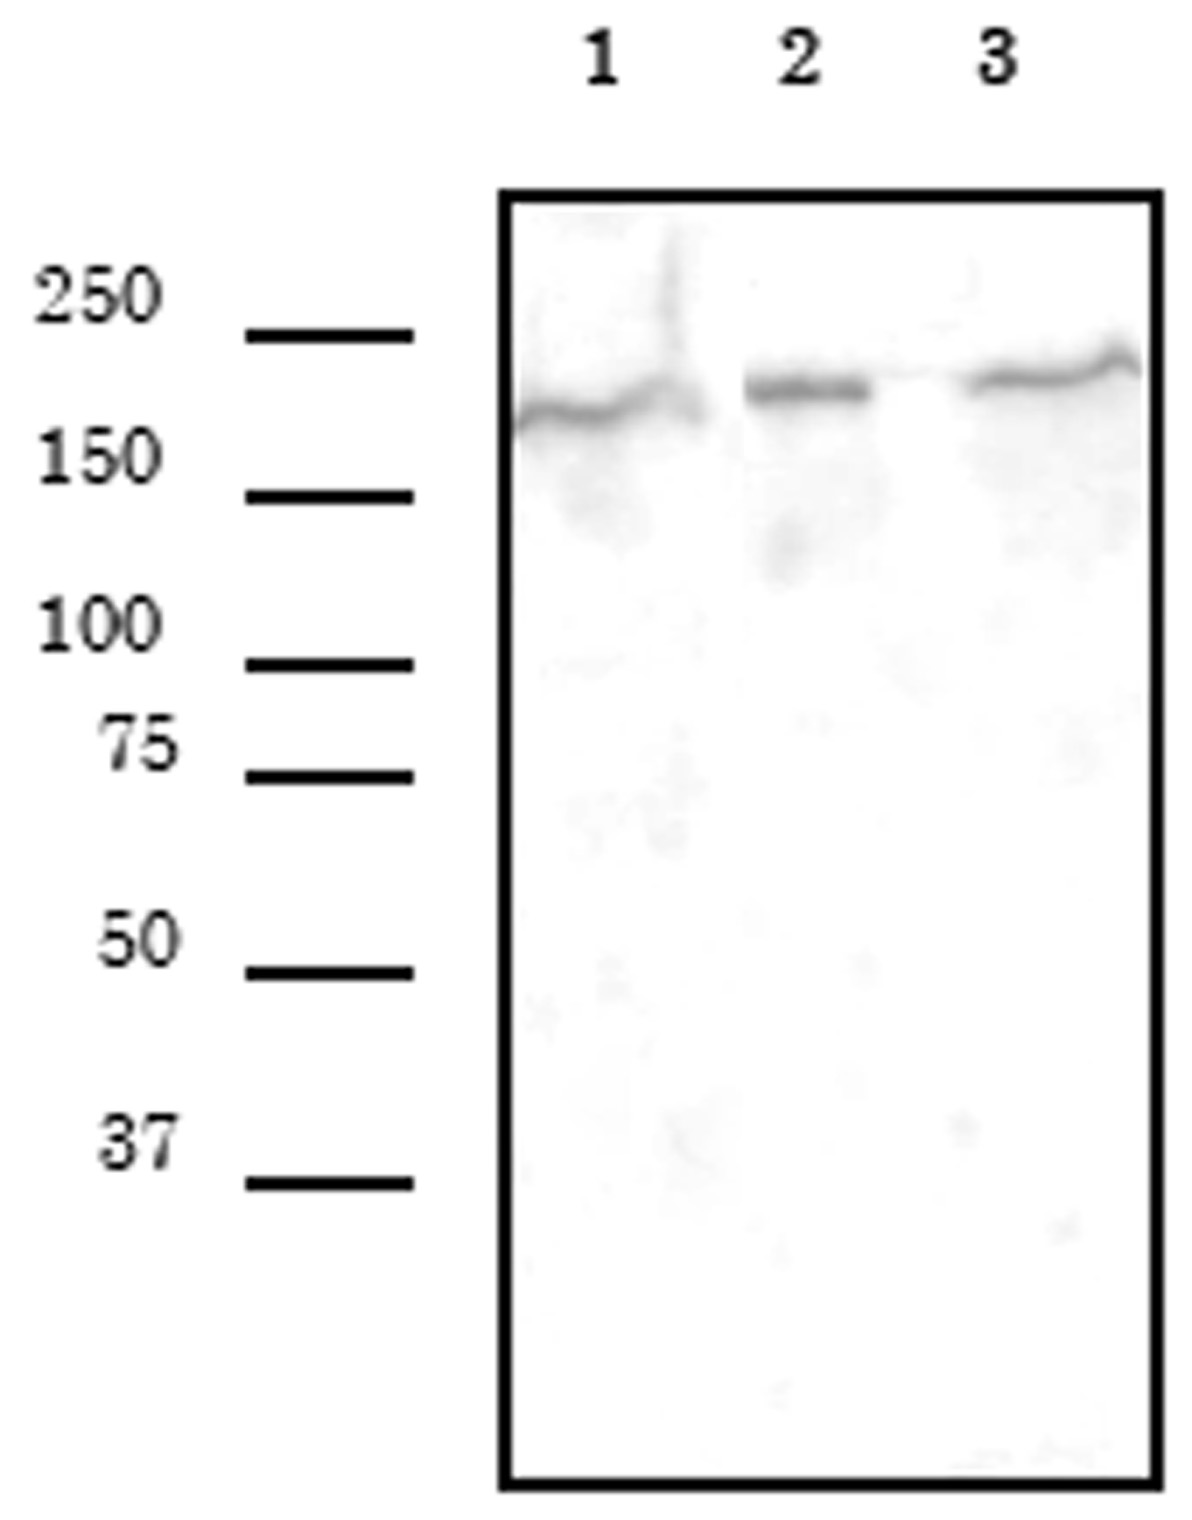 SMARCA4 antibody (mAb) (Clone 5B7) tested by Western blot. Whole cell extracts were probed with SMARCA4 antibody (mAb). Lane 1: L929 cells. Lane 2: HeLa cells. Lane 3: Cos cells